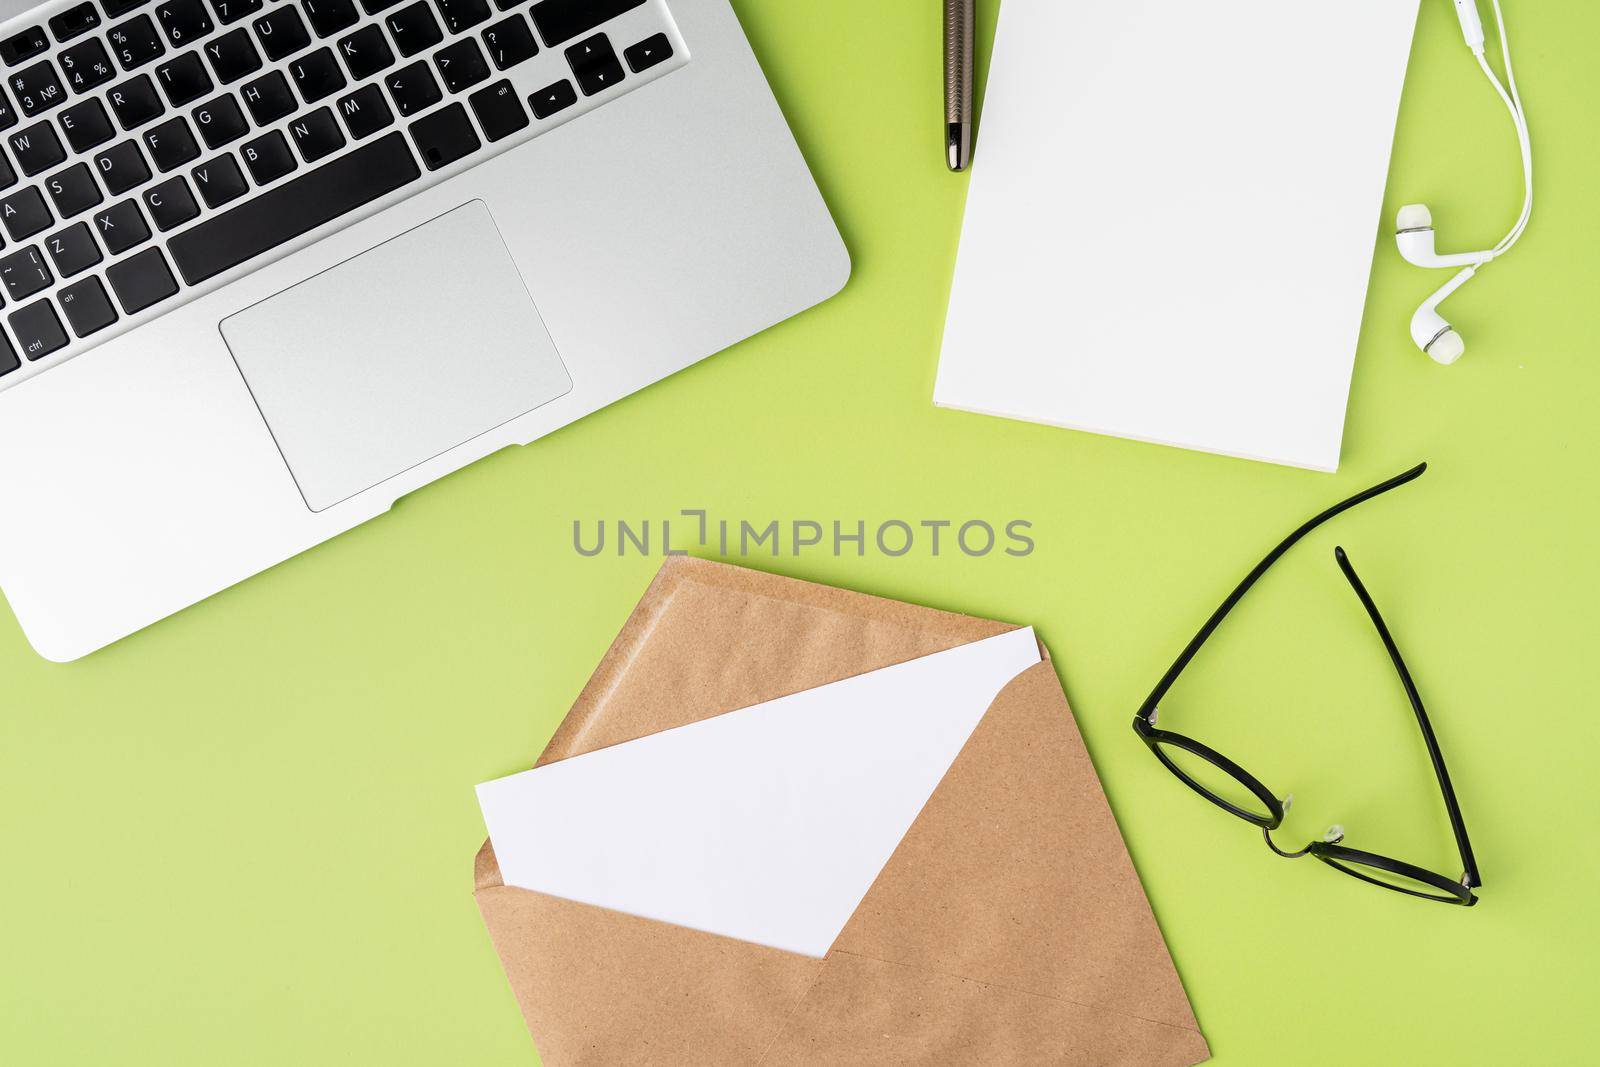 Blank paper sheet in craft envelope on green background. Metallic laptop keyboard, empty notebook, white earphones, glasses, pen. Horizontal from above, copy space